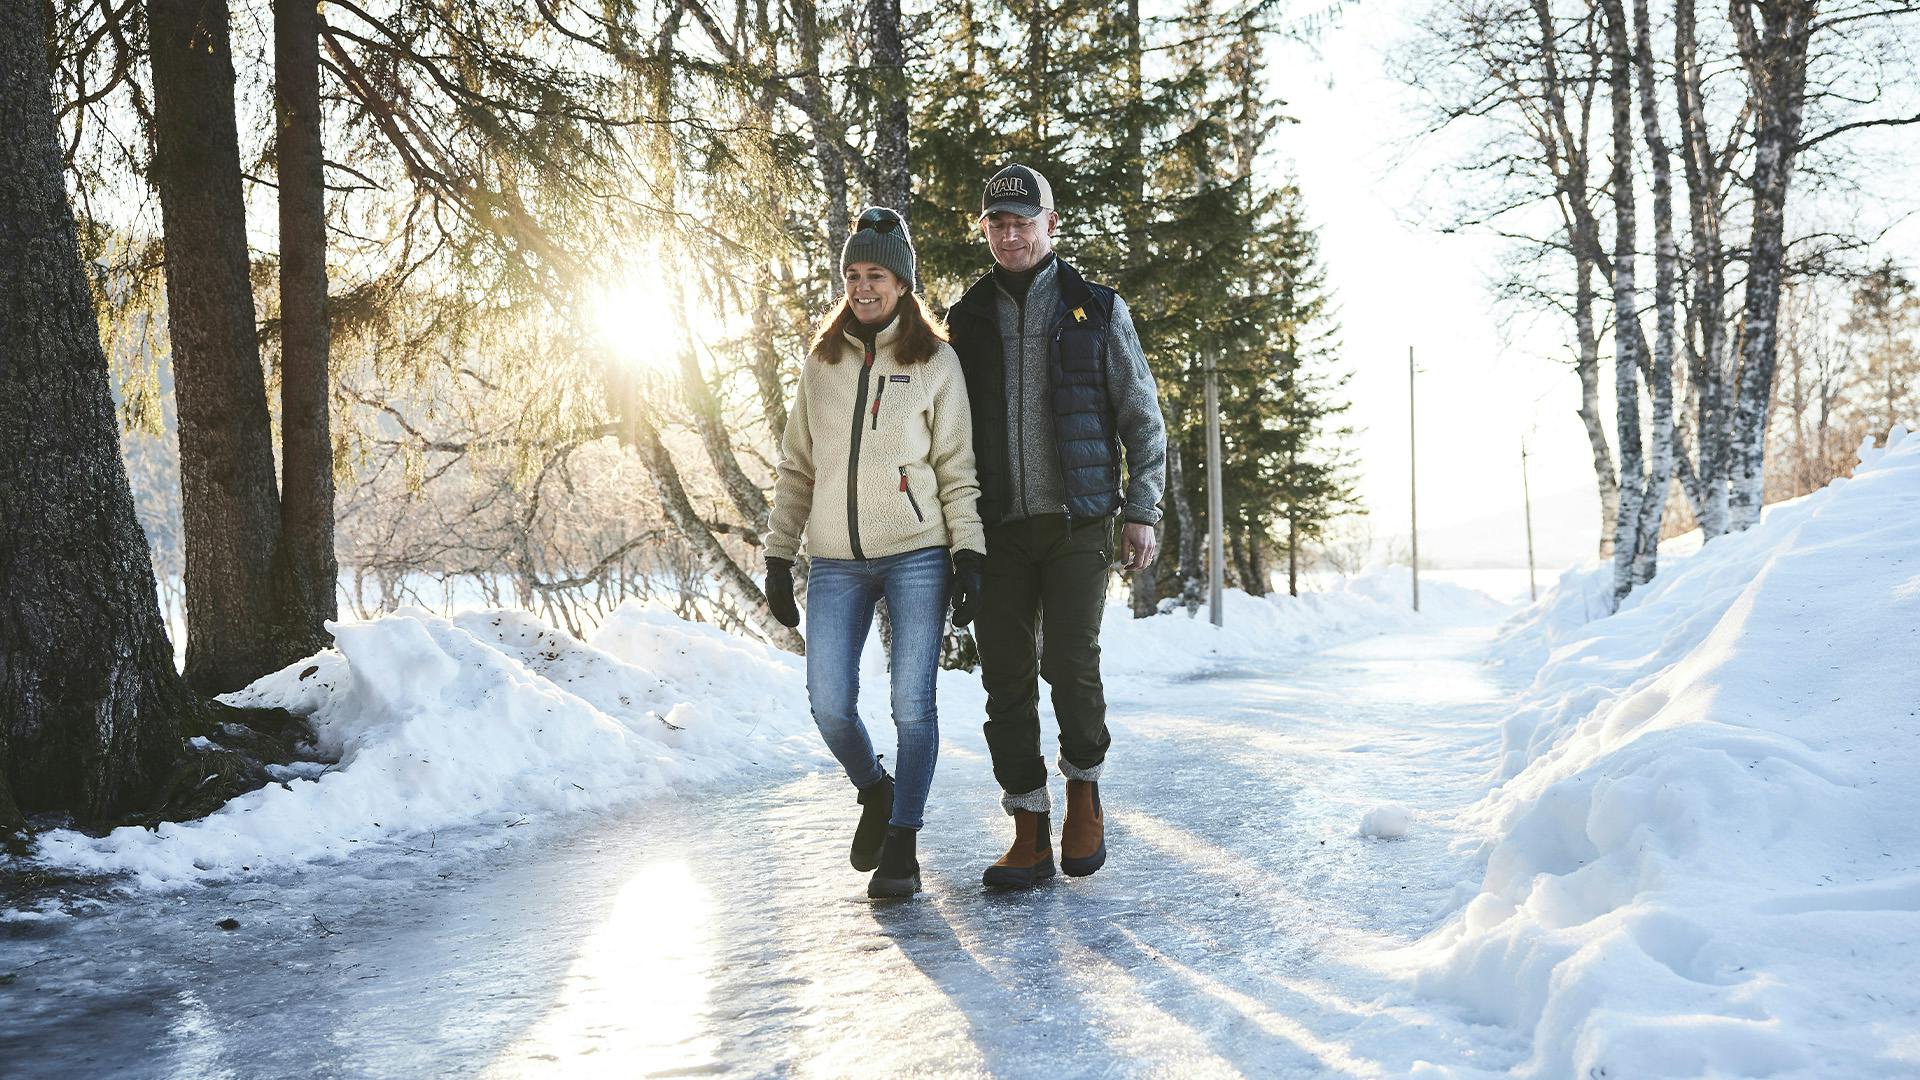 A couple walking on an icy road, enjoying a winter walk together.